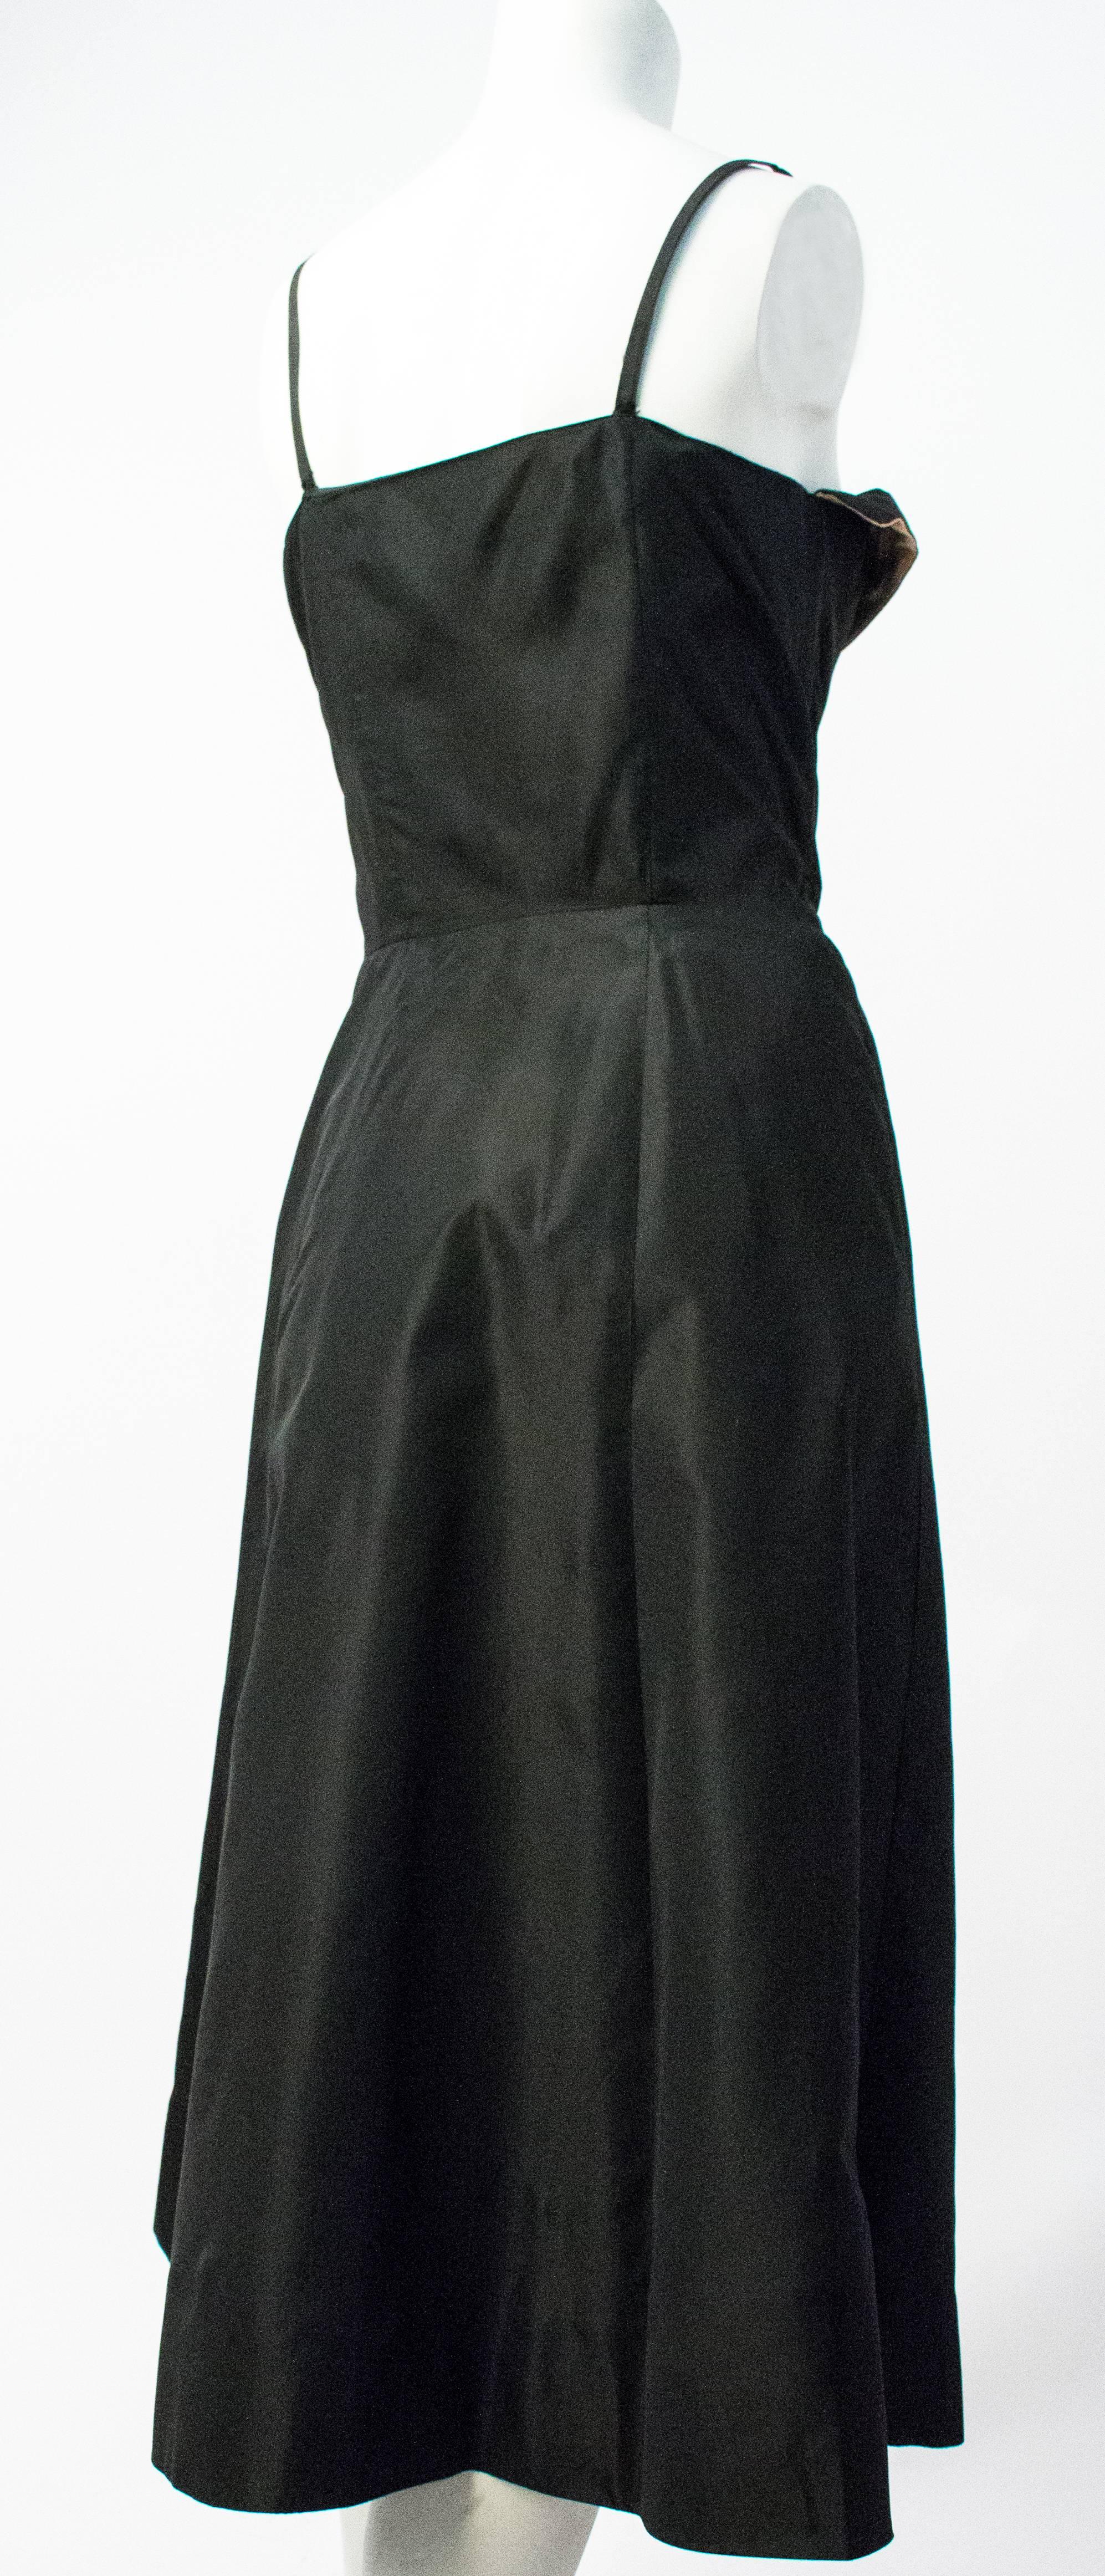 50s Black Taffeta w/ Bead Detail Evening Dress Suit In Good Condition For Sale In San Francisco, CA